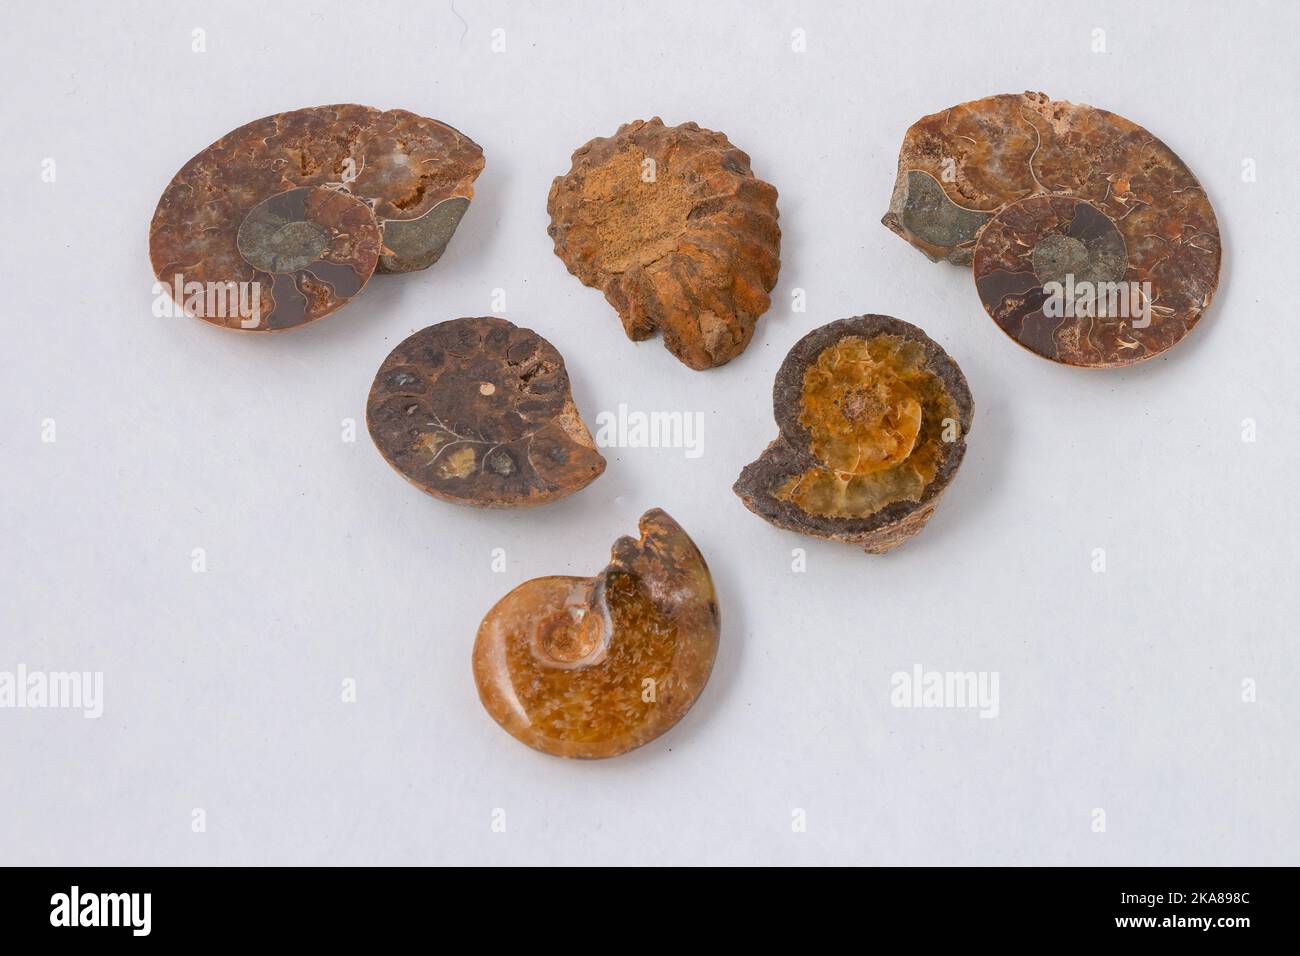 A top view of ammonite fossil specimens of different sizes isolated on a white background Stock Photo